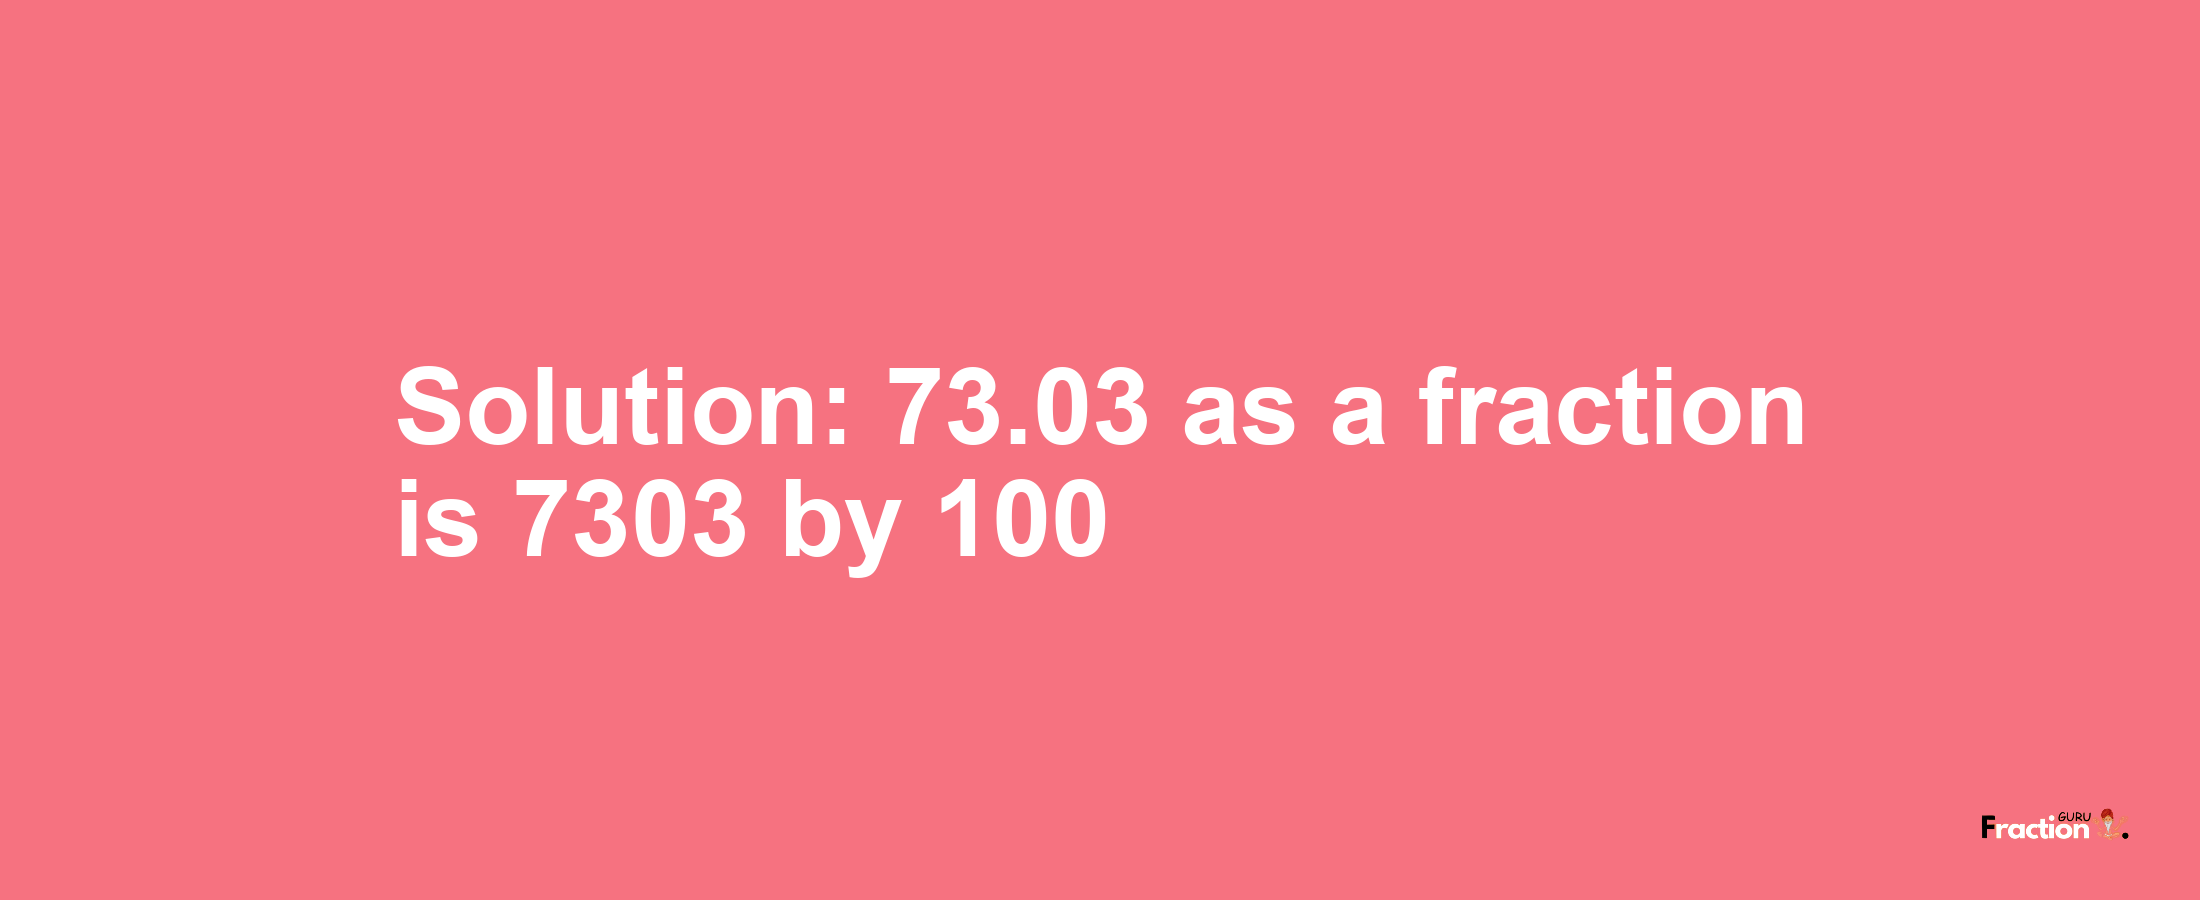 Solution:73.03 as a fraction is 7303/100